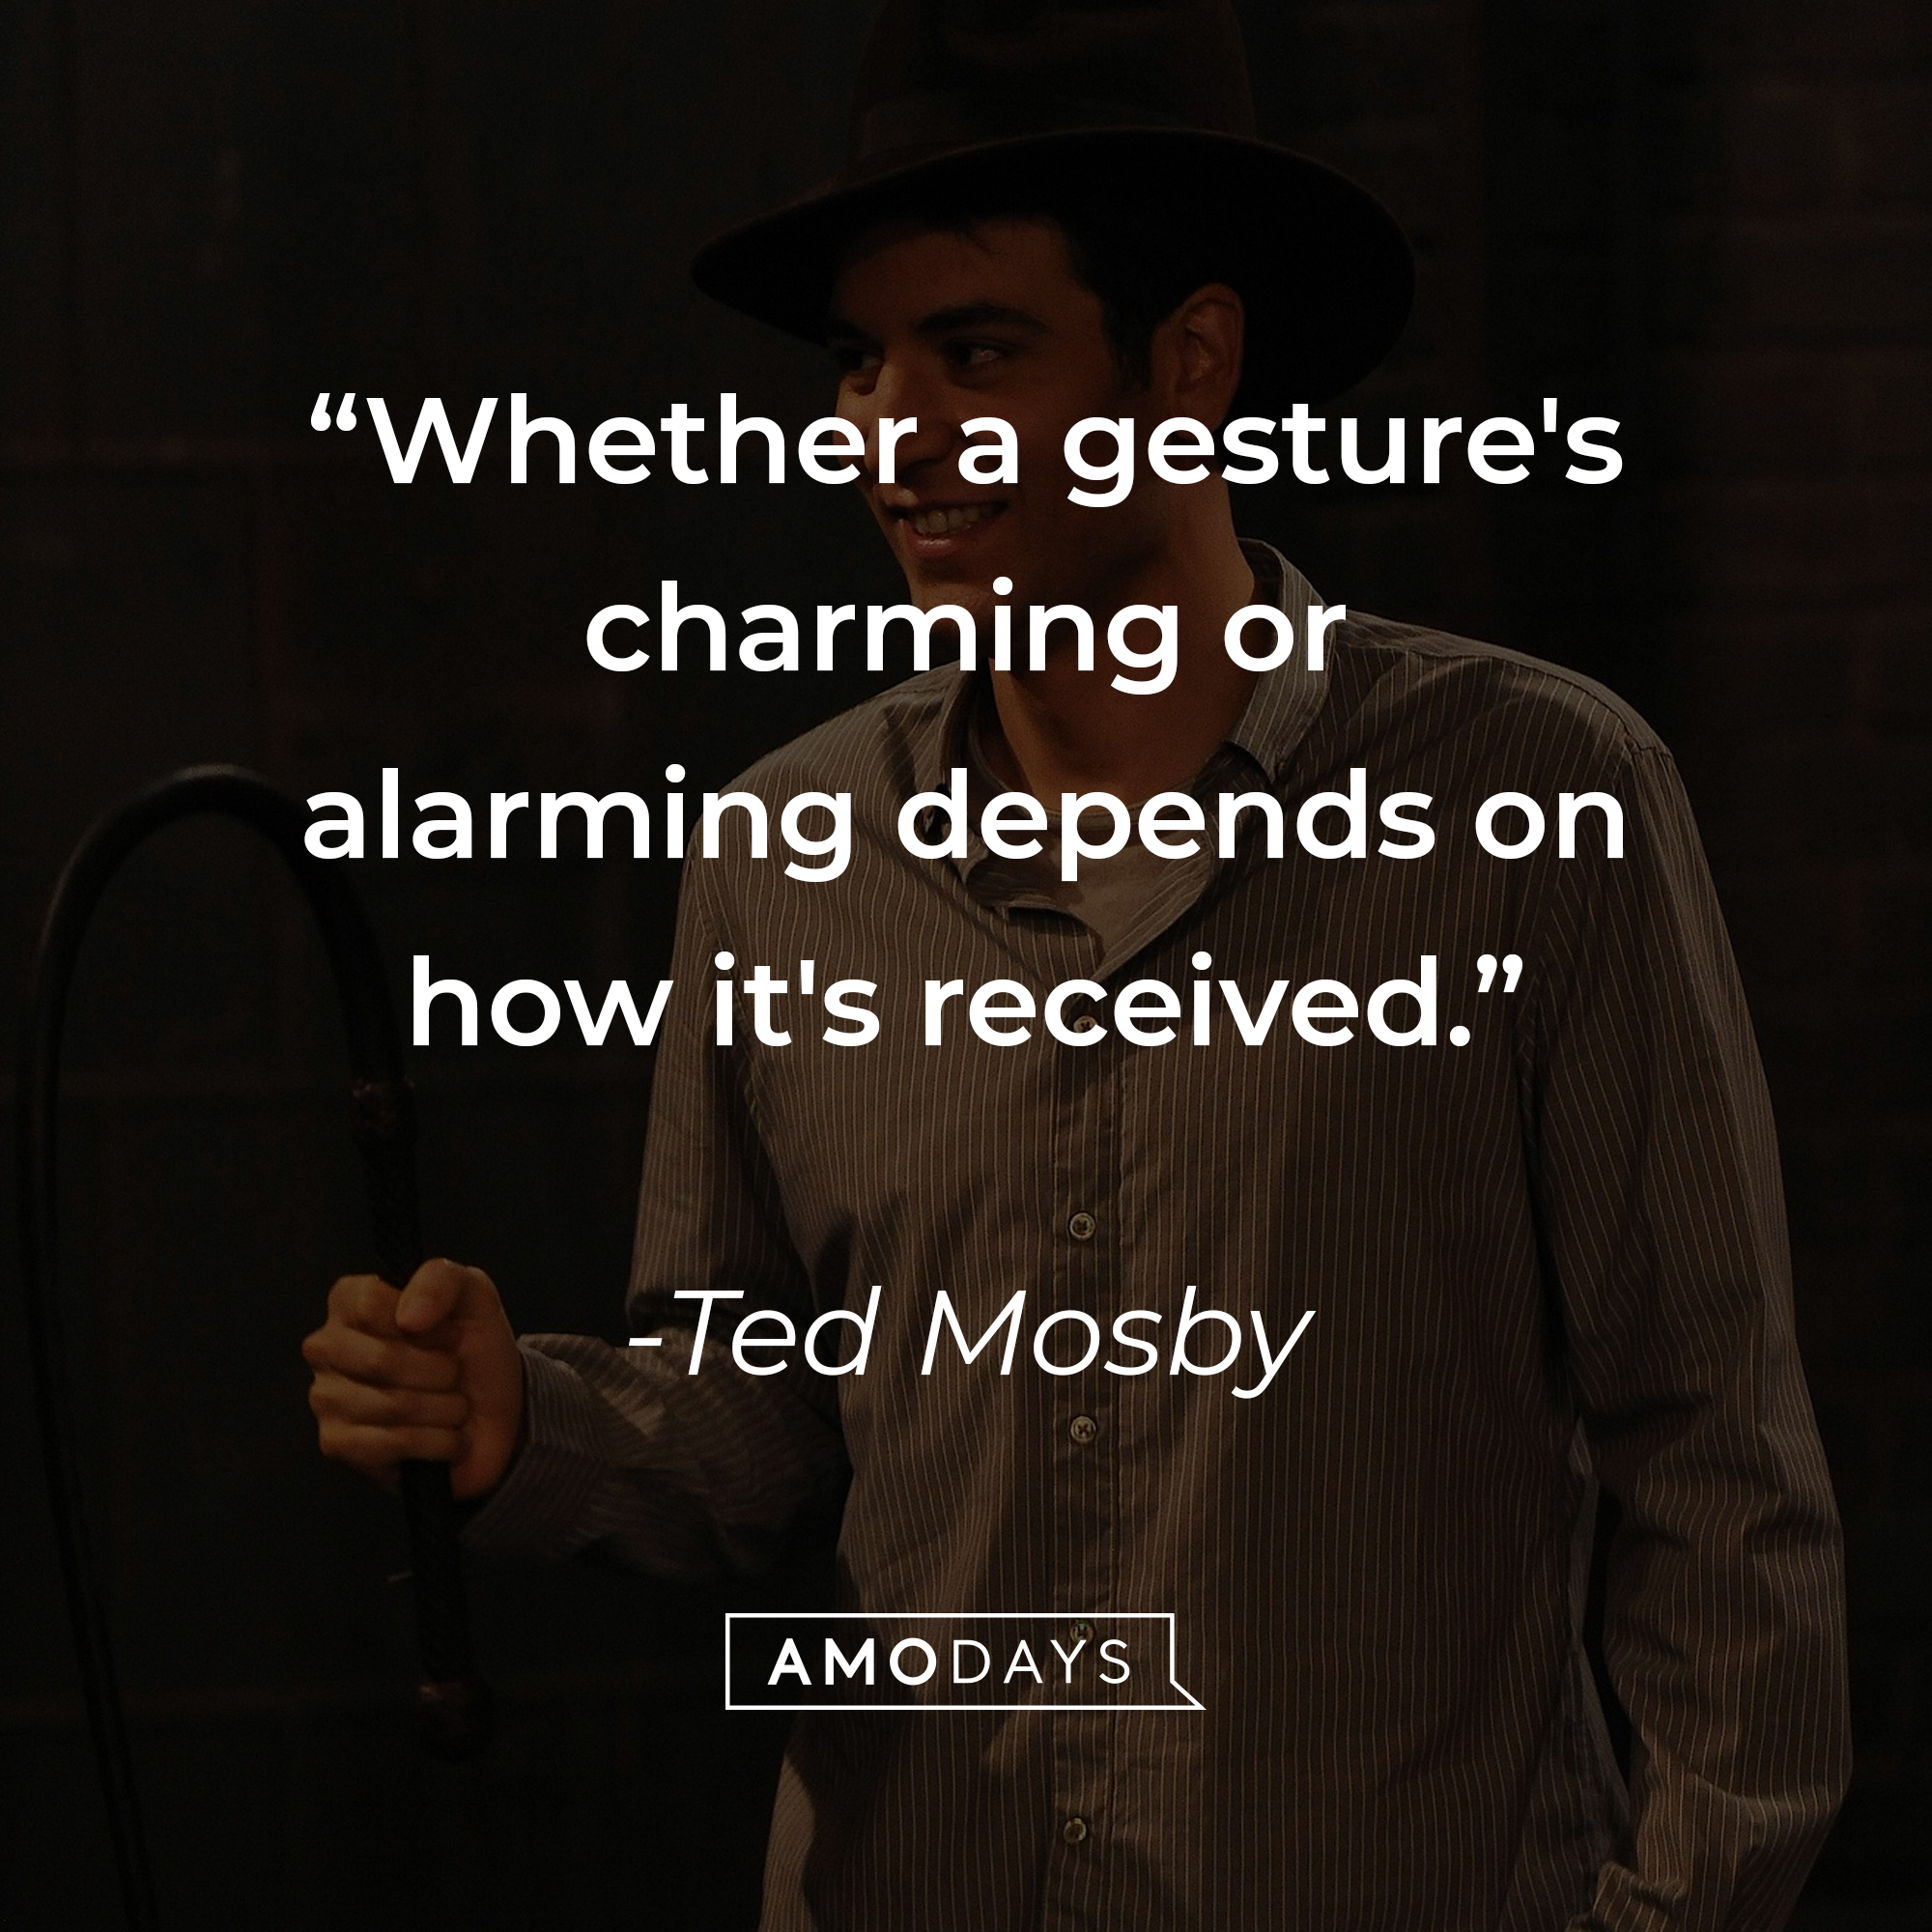 Ted Mosby's quote: “Whether a gesture's charming or alarming depends on how it's received.” | Source: facebook.com/OfficialHowIMetYourMother